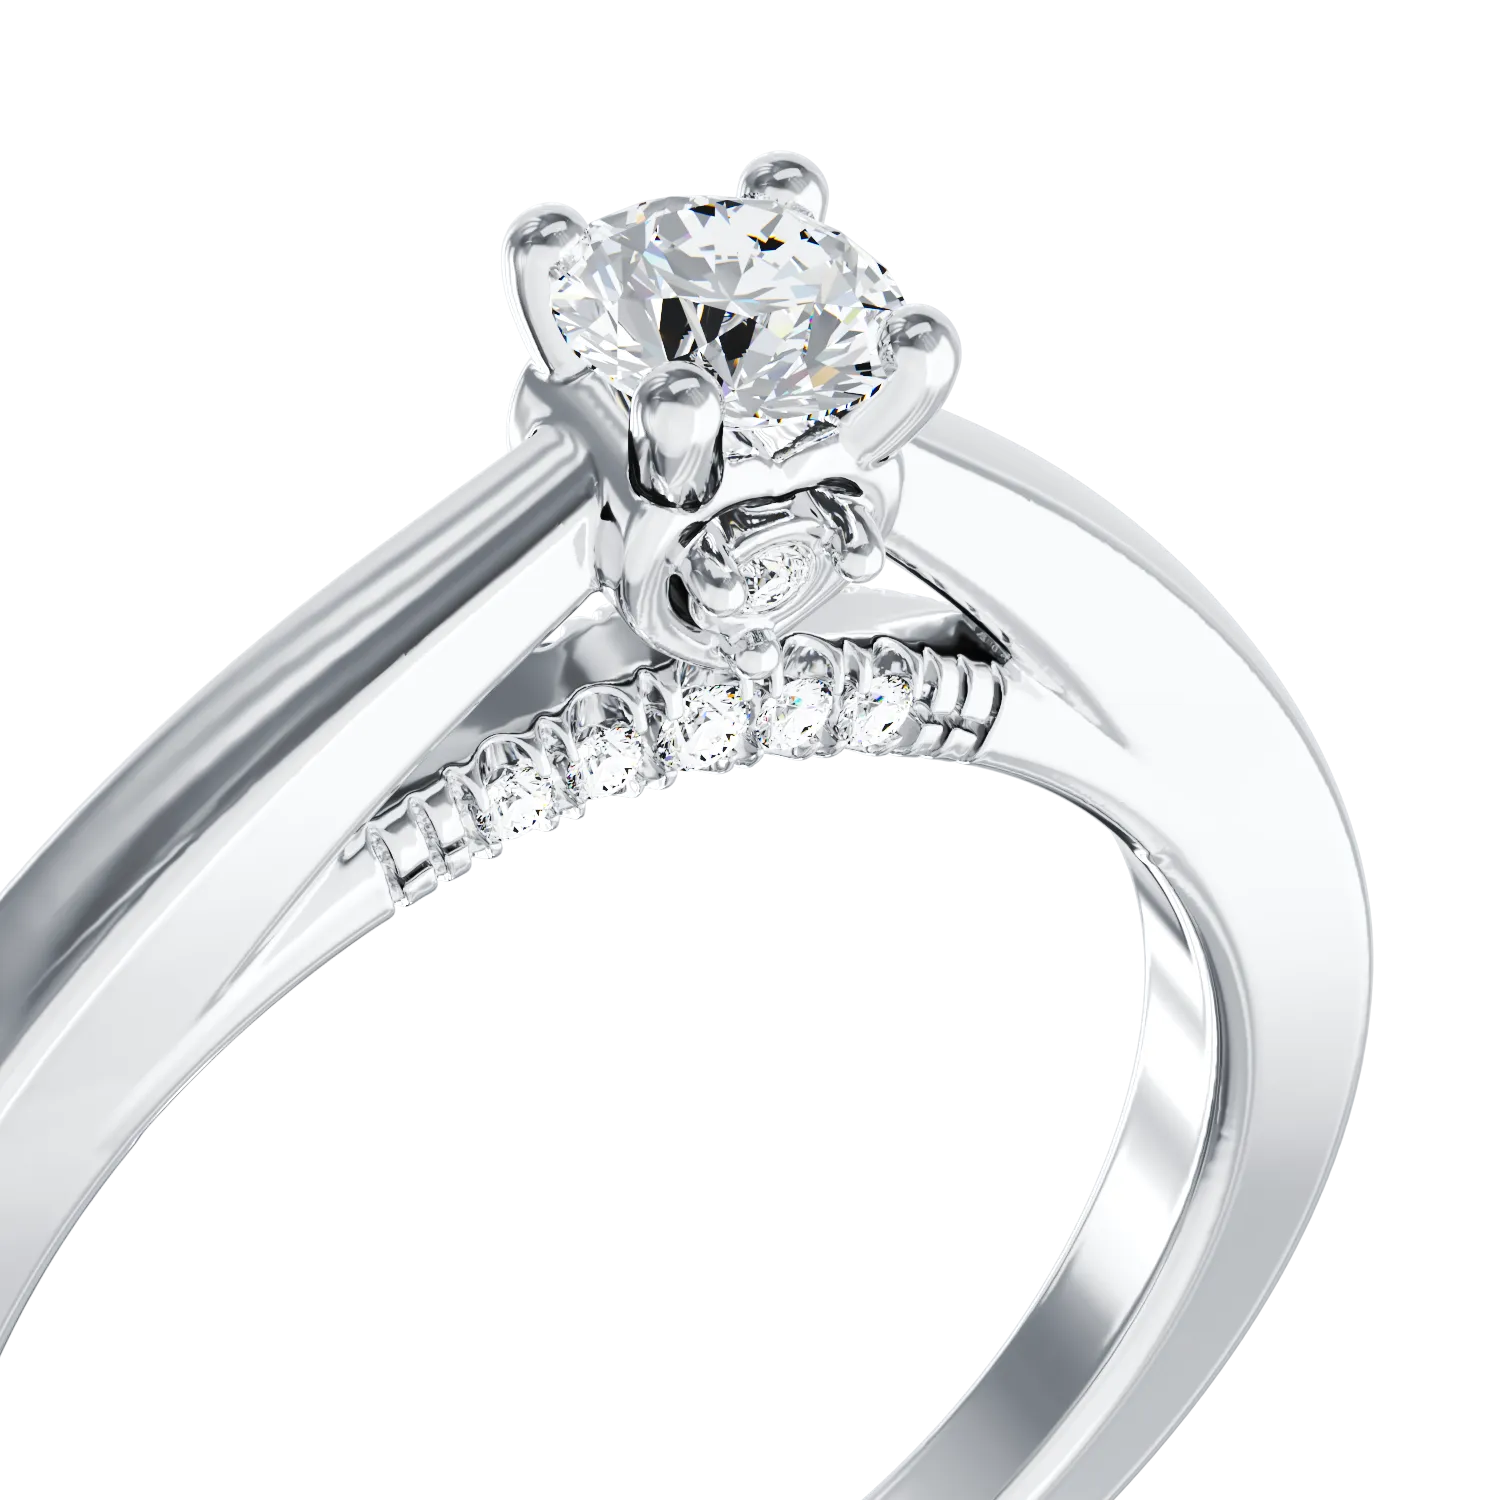 18K white gold engagement ring with 0.4ct diamond and 0.05ct diamonds